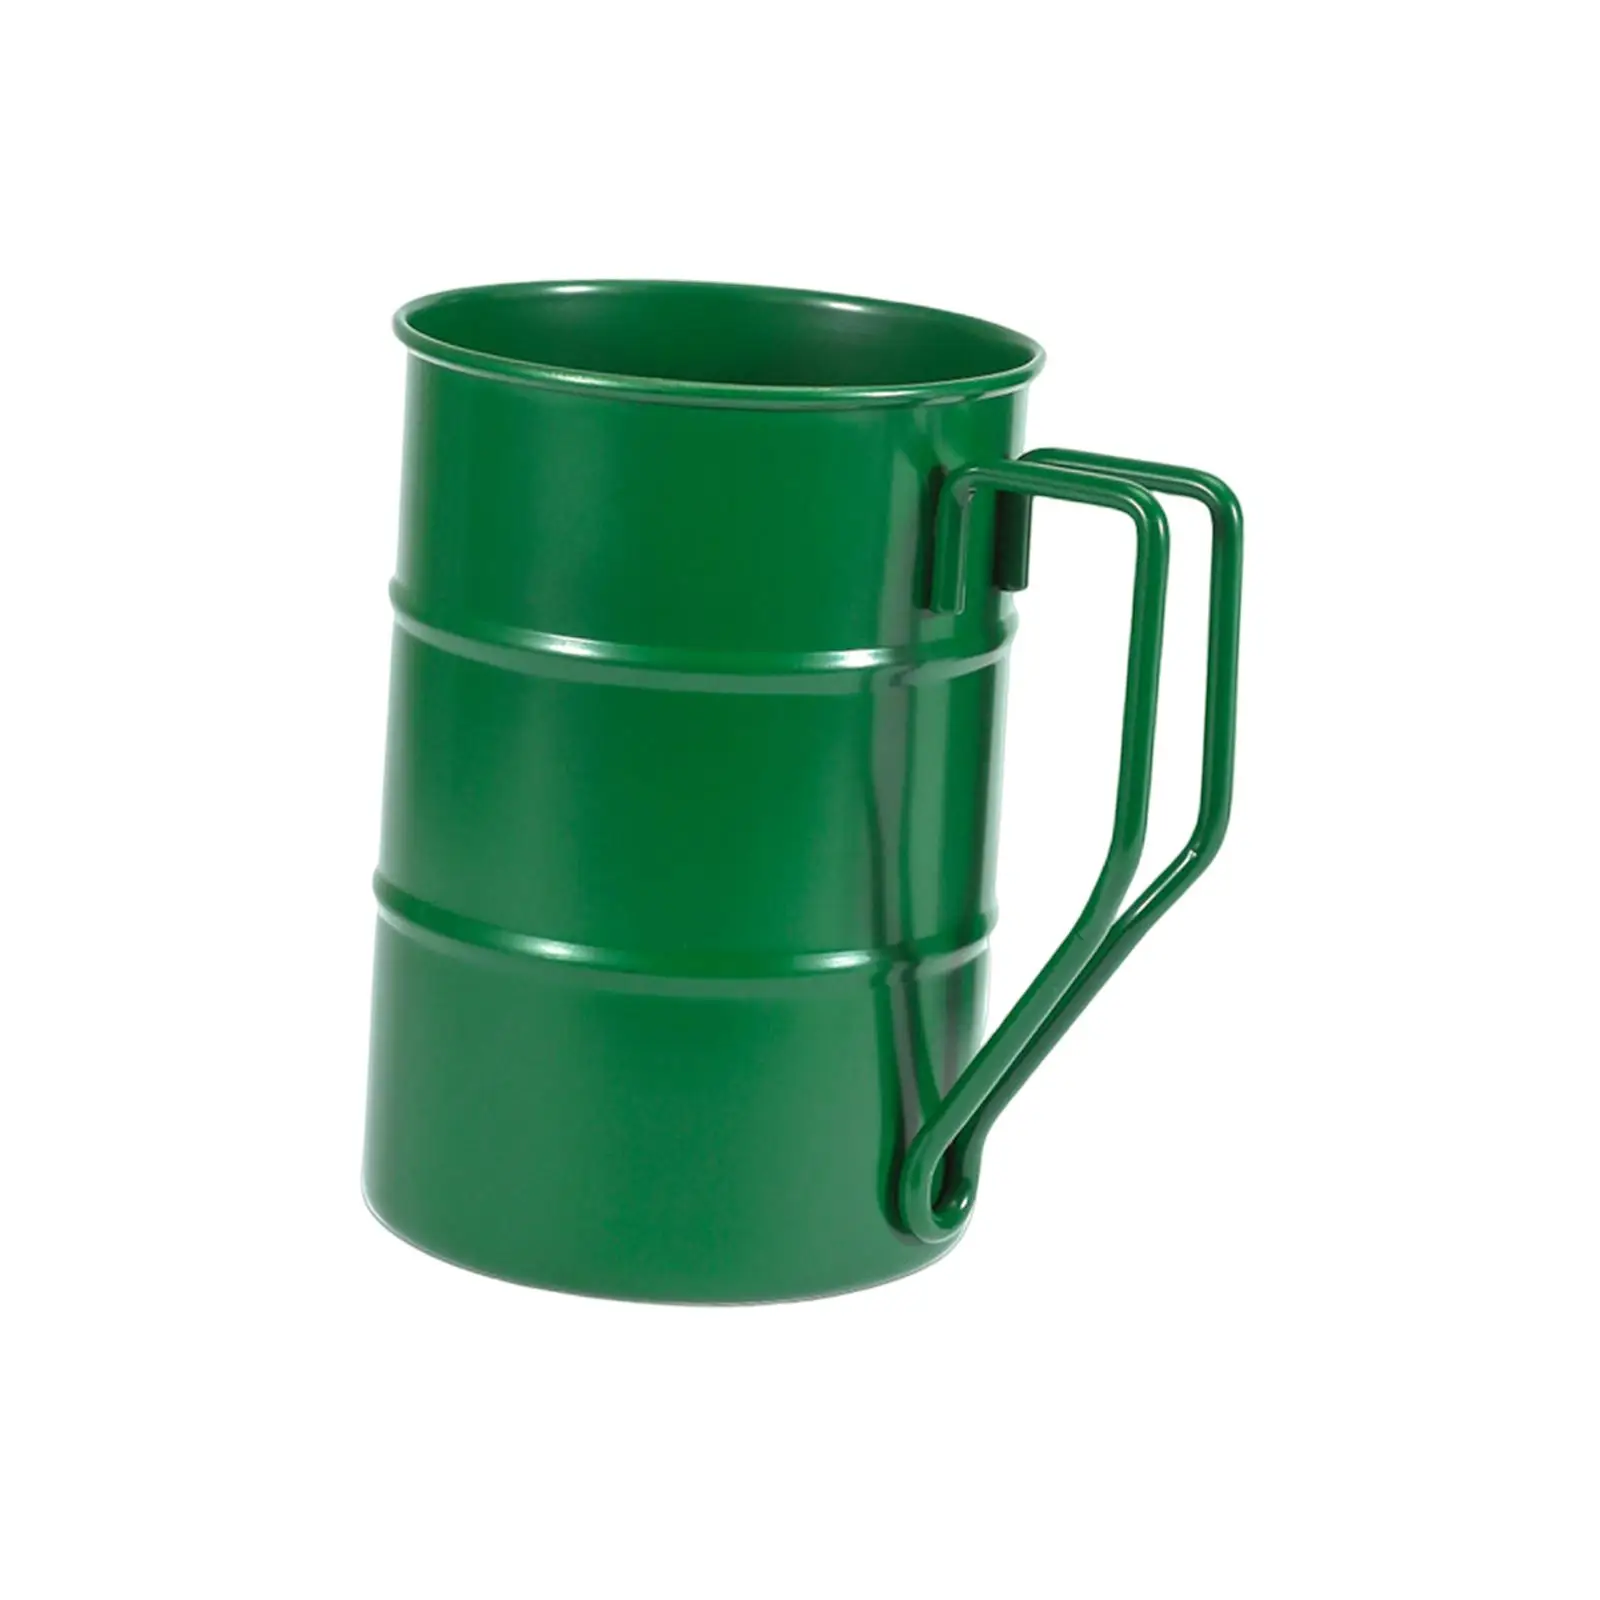 Mug Multifunctional Portable Water Cup Camping Cup for Picnic Outdoor Travel